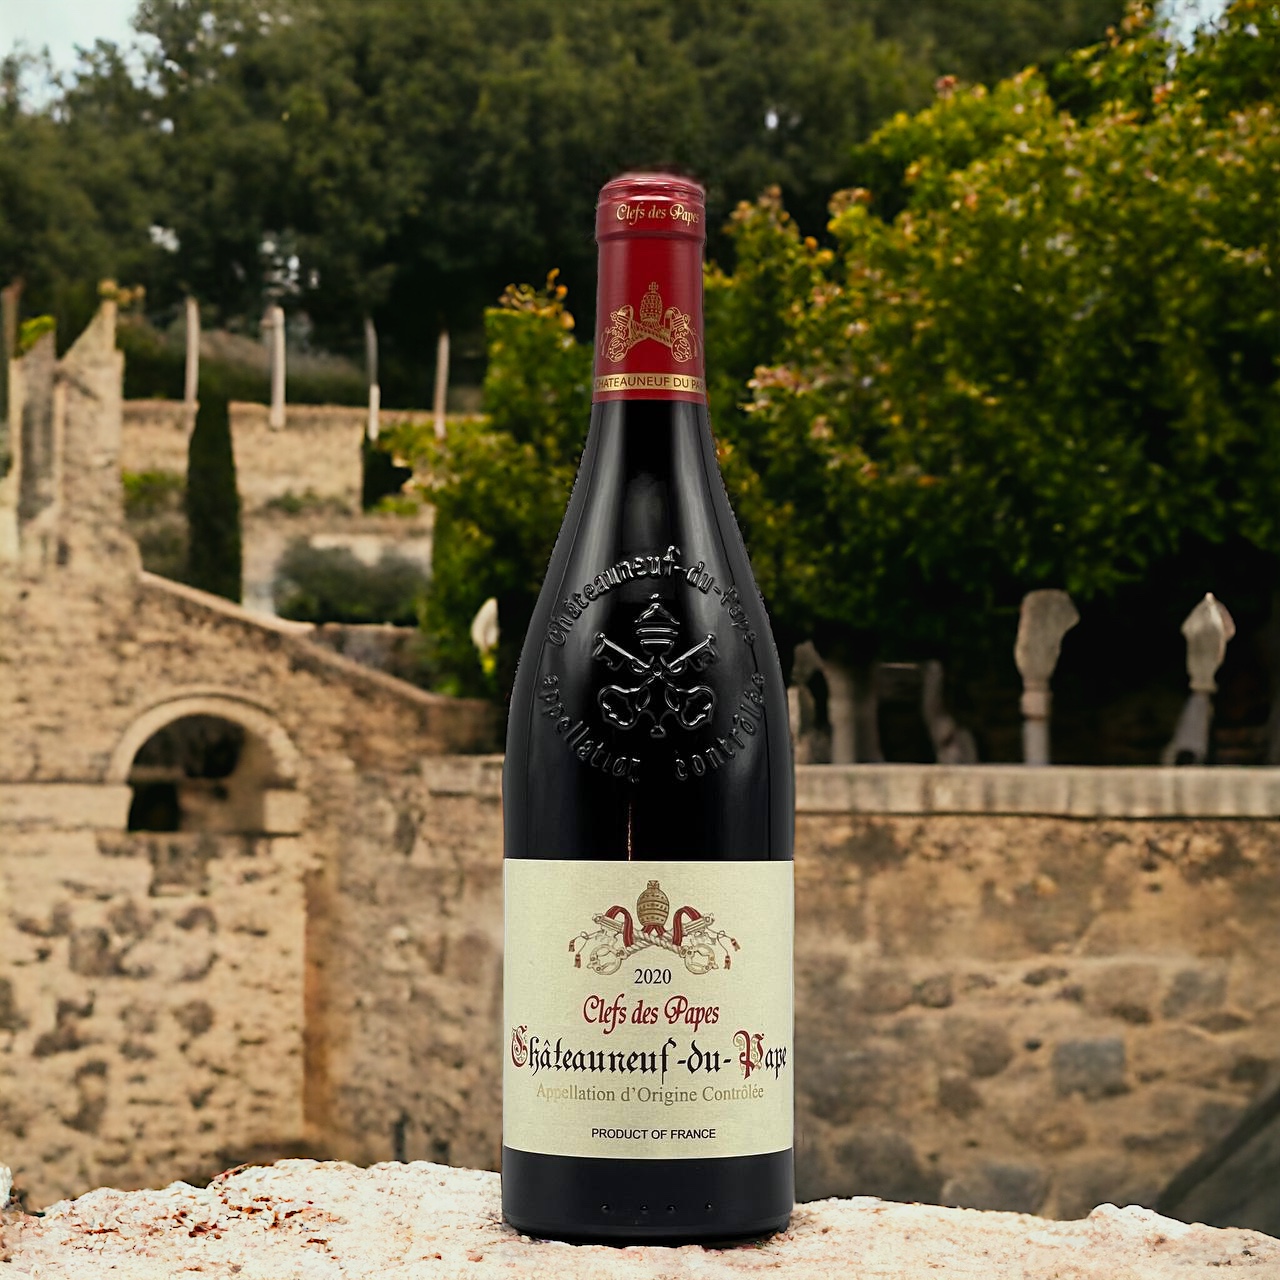 where is chateauneuf du pape region